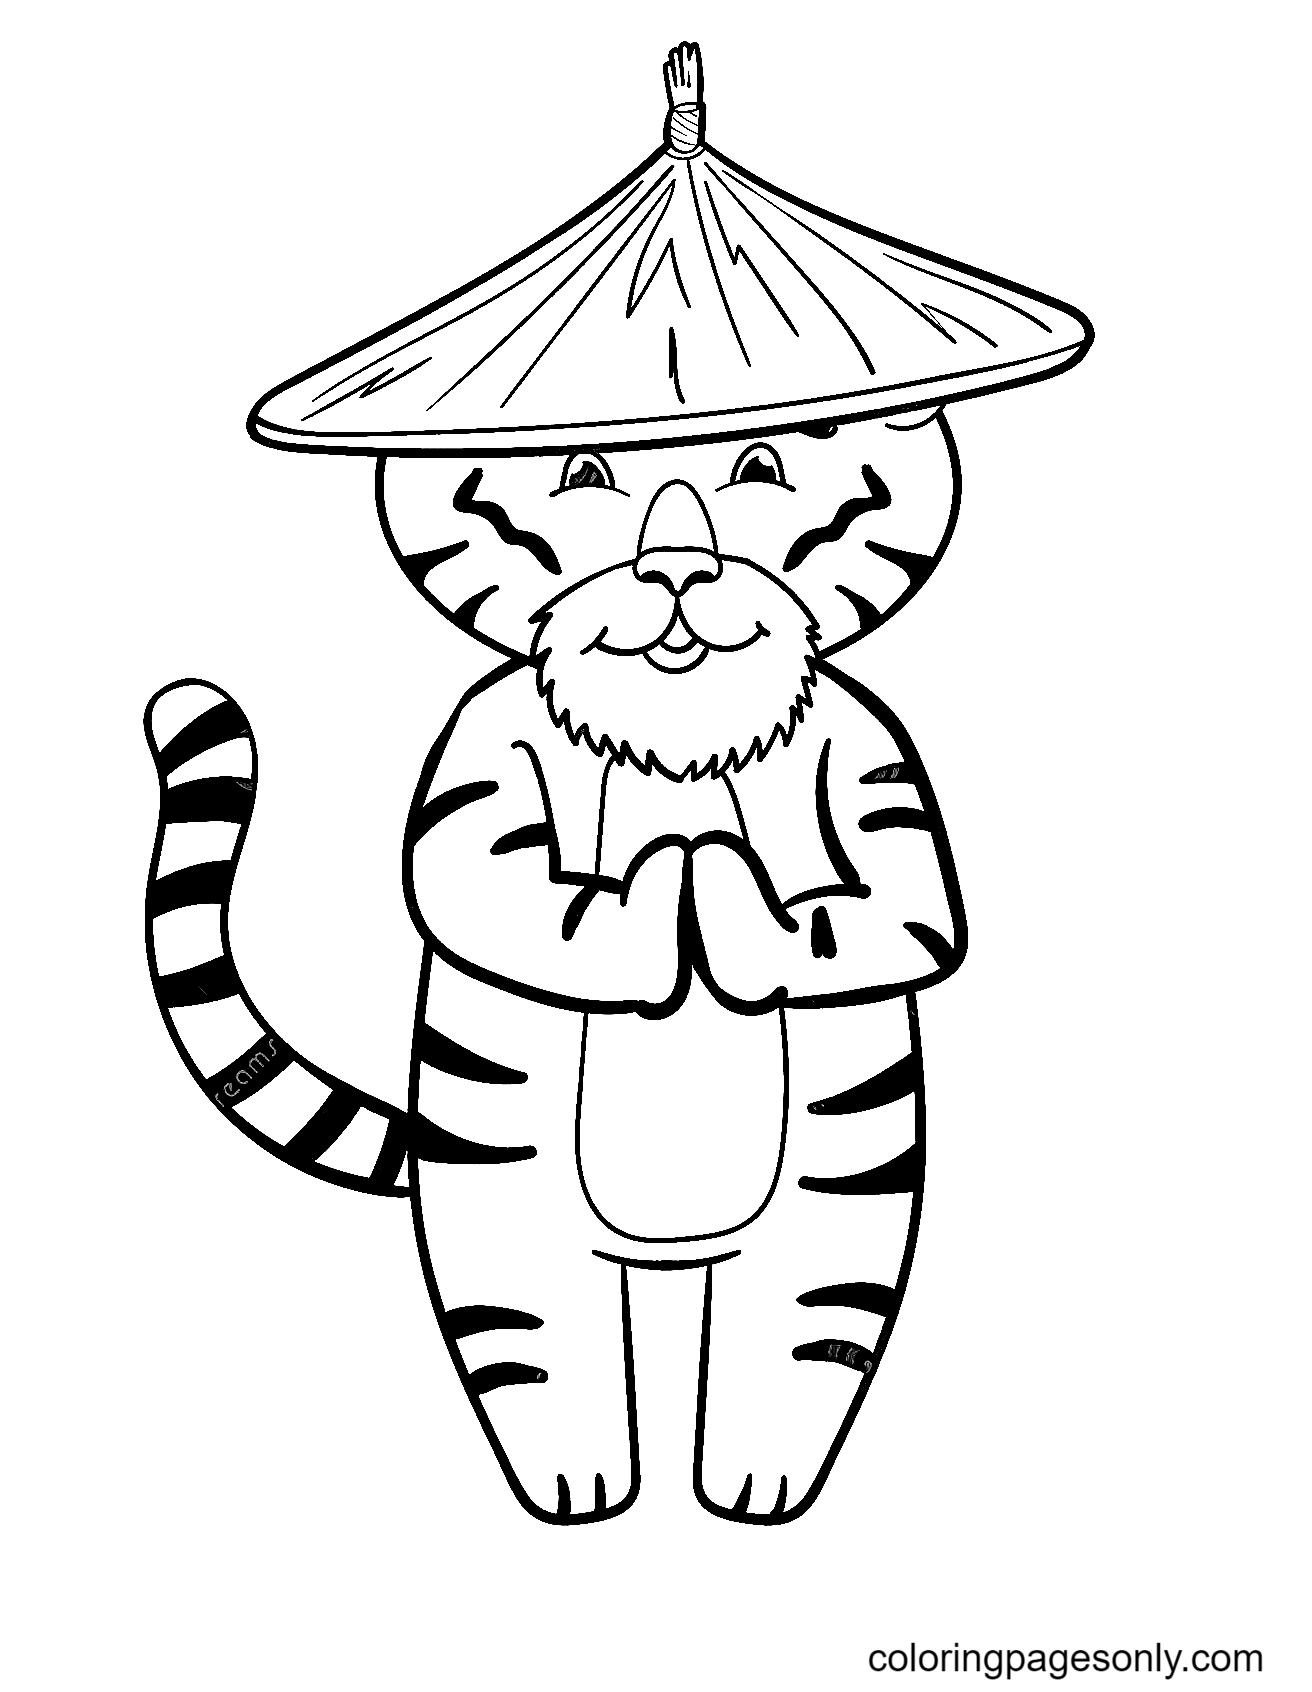 Tiger New Year 2022 Coloring Pages